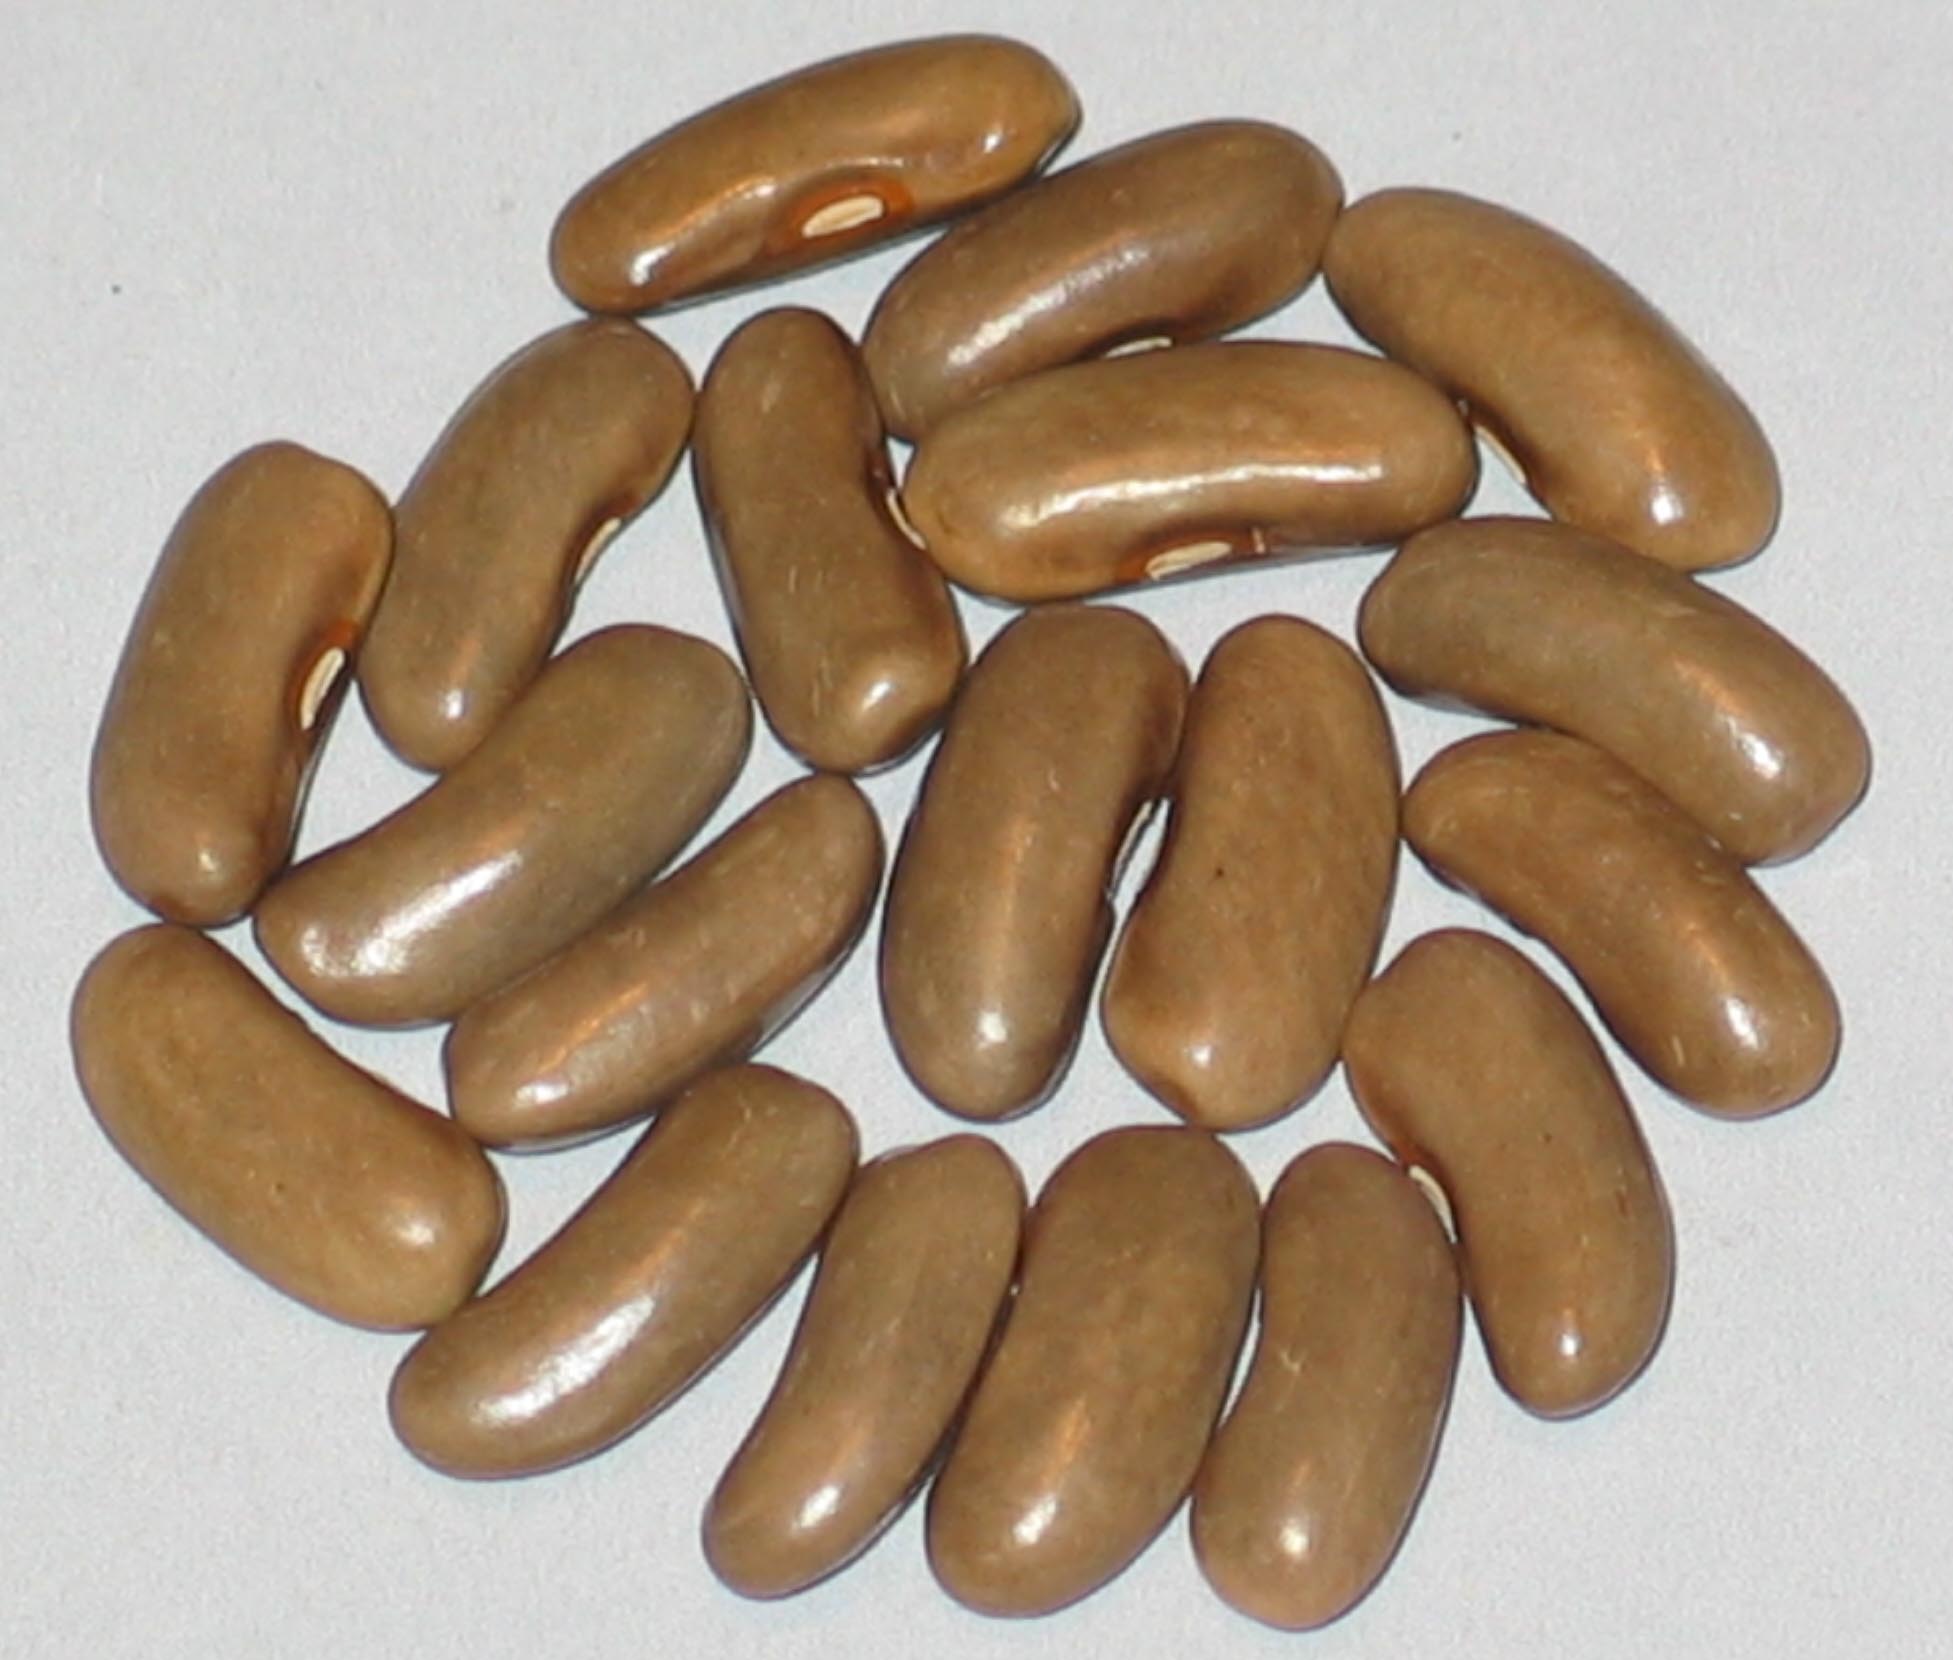 image of Havens beans